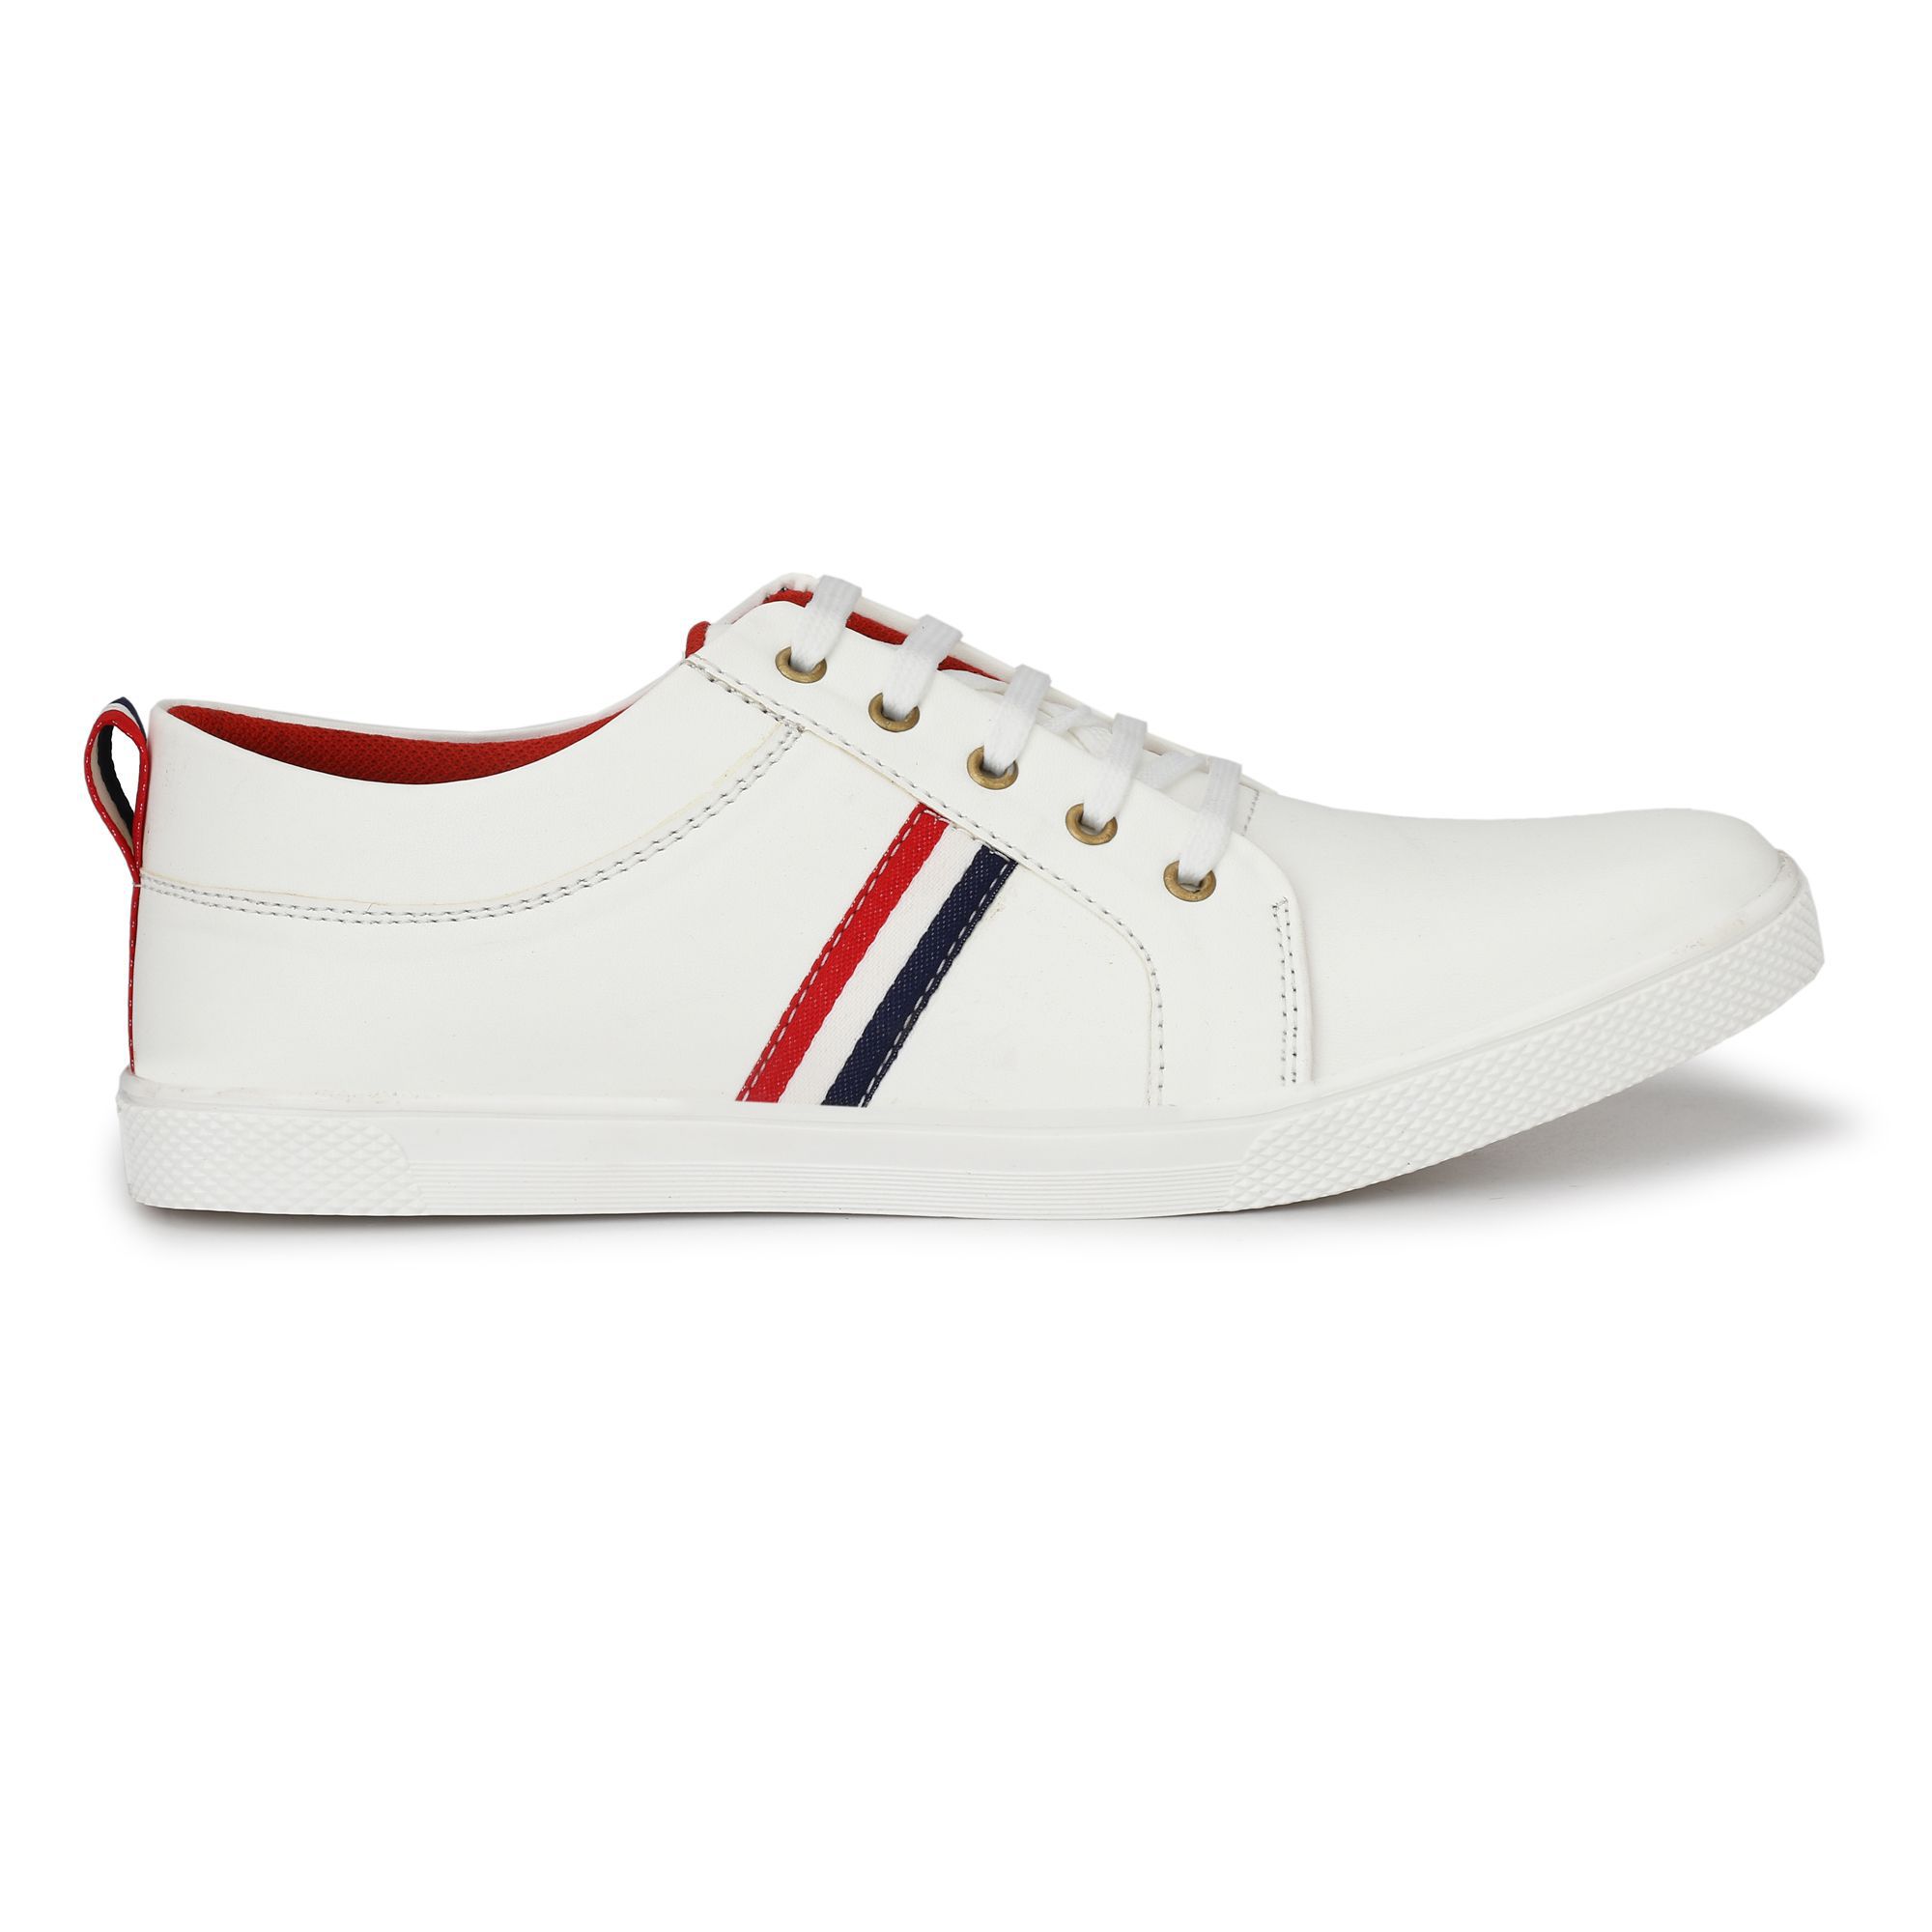 addoxy casual shoes